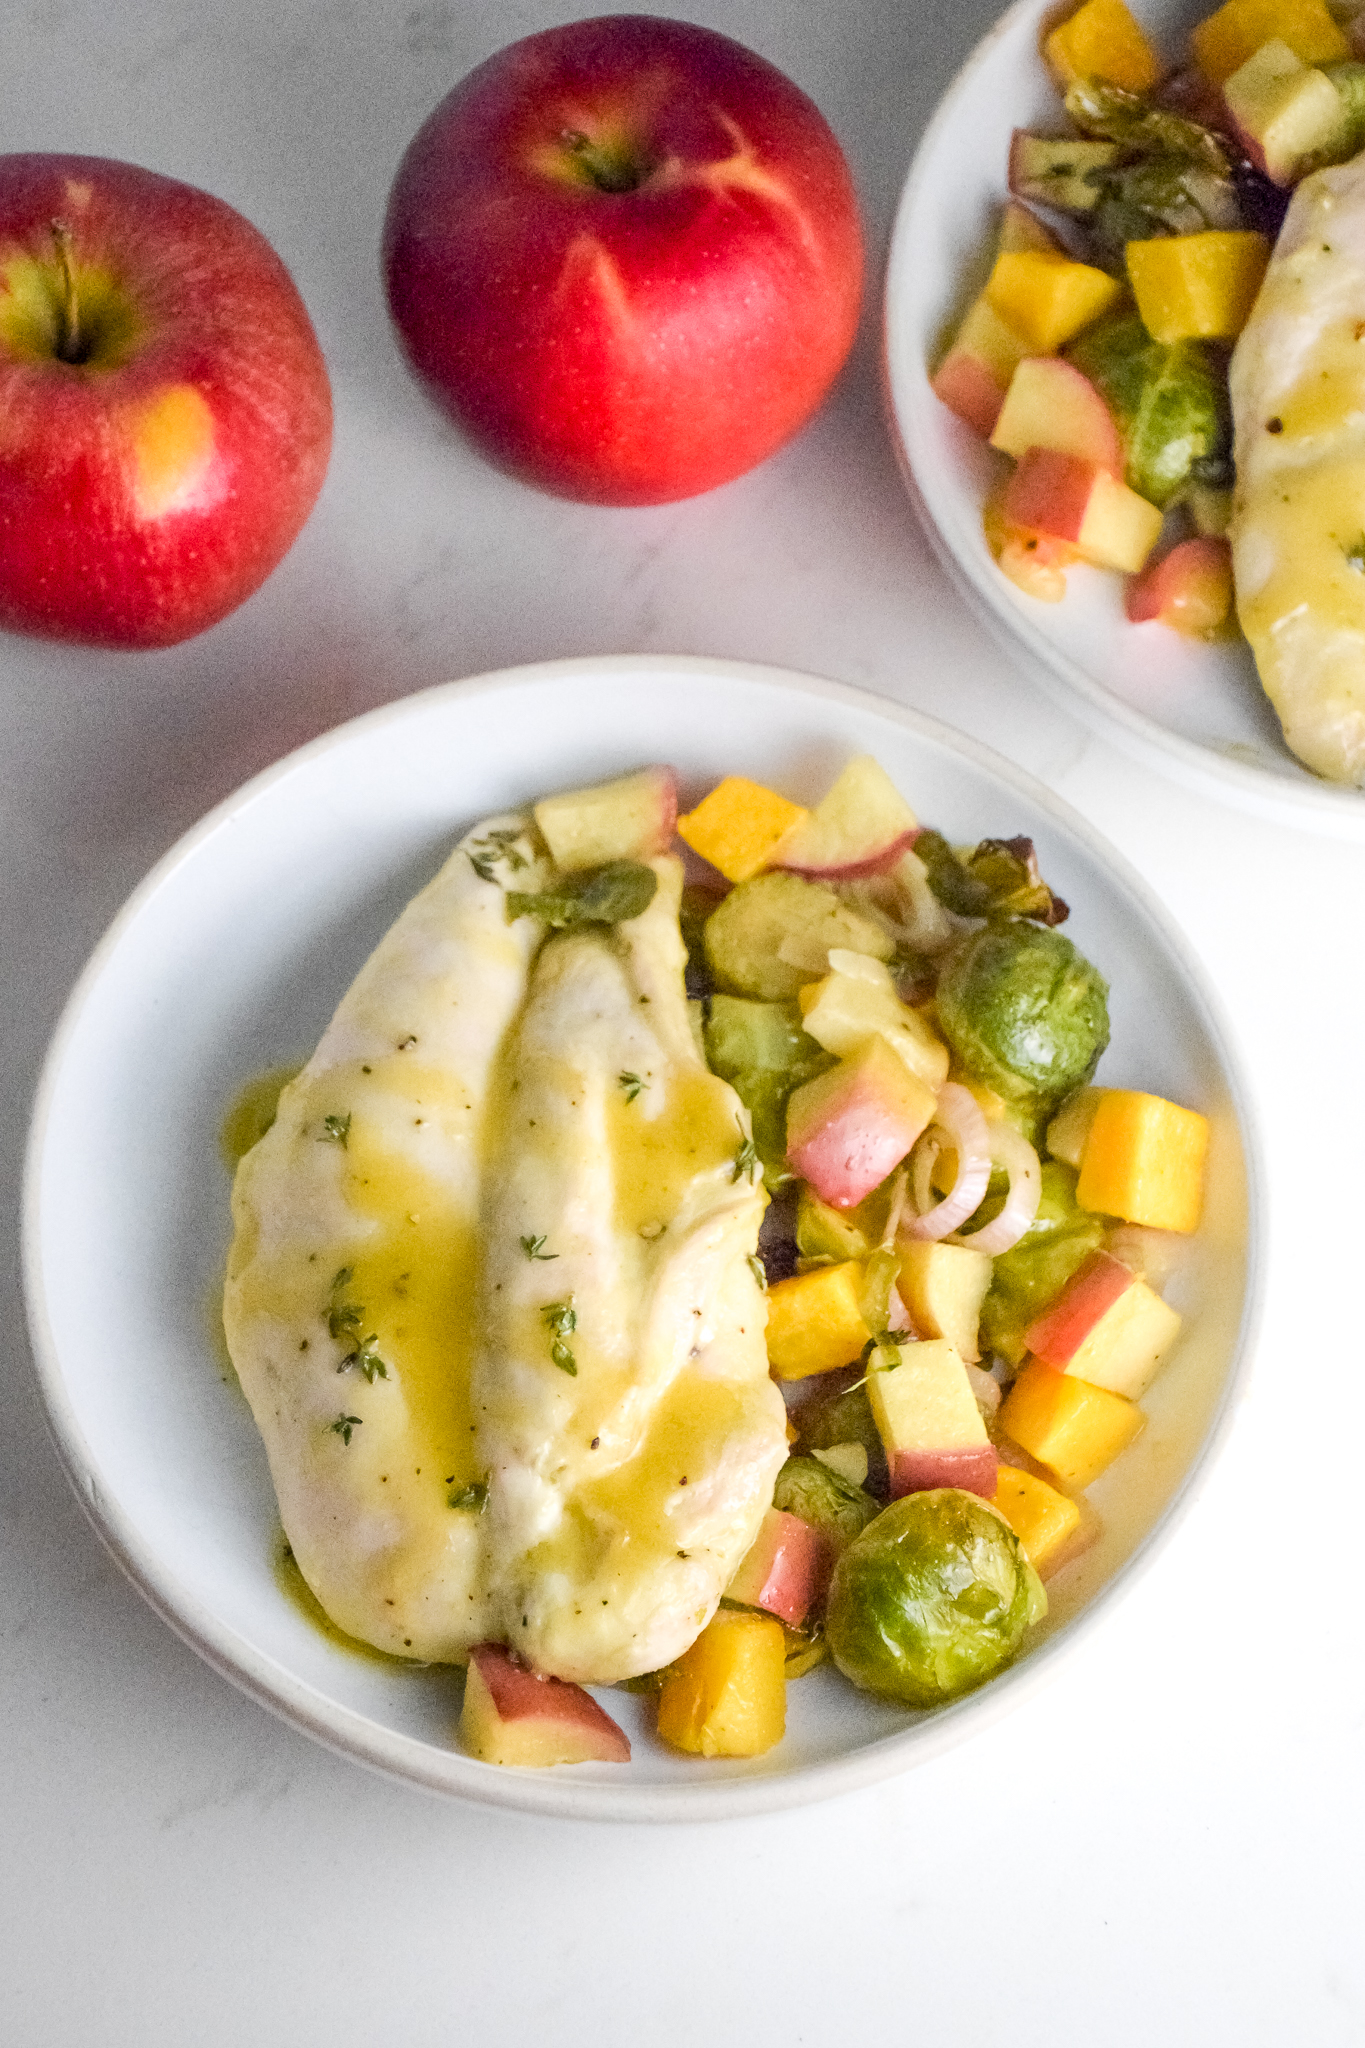 This Chicken with Apples and Veggies in a Maple Dijon Sauce is an easy, quick, healthy meal that is delicious and filling!